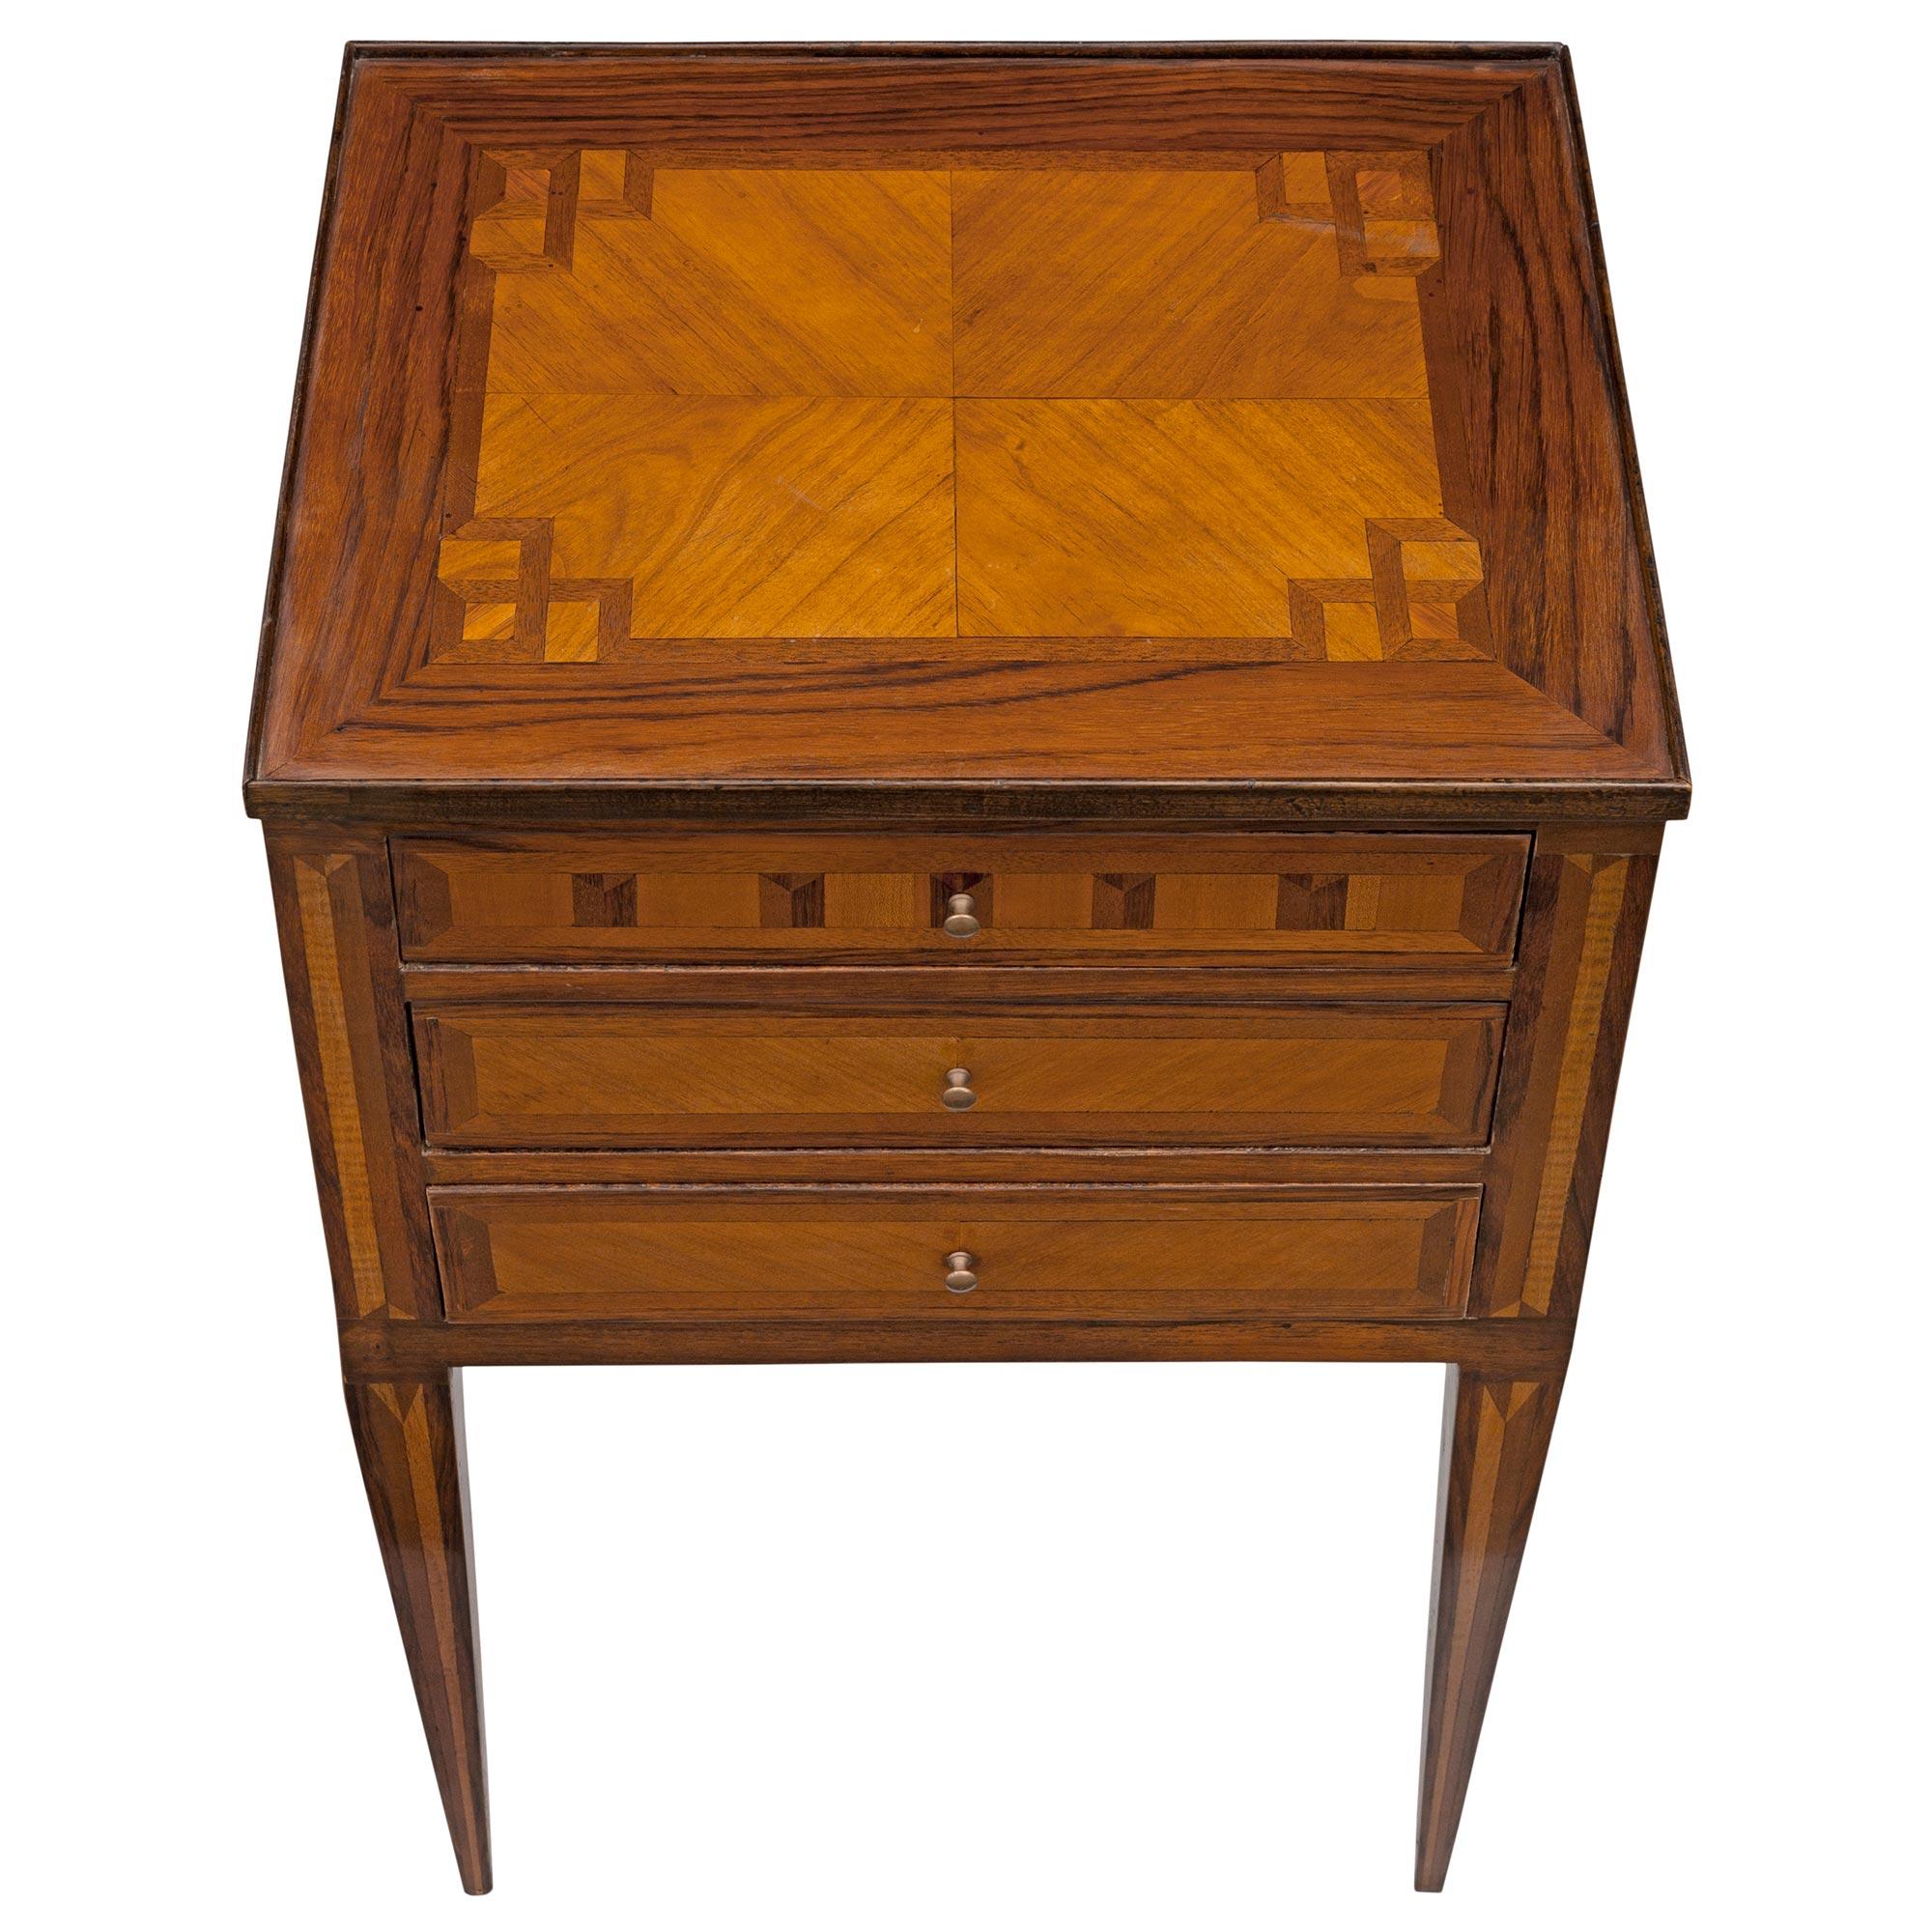 An elegant small scale French 19th century Louis XVI st. tulipwood and kingwood side table / chest. The table is raised by slender square tapered legs decorated with beautiful inlaid designs. At the center are three drawers with lovely butterfly